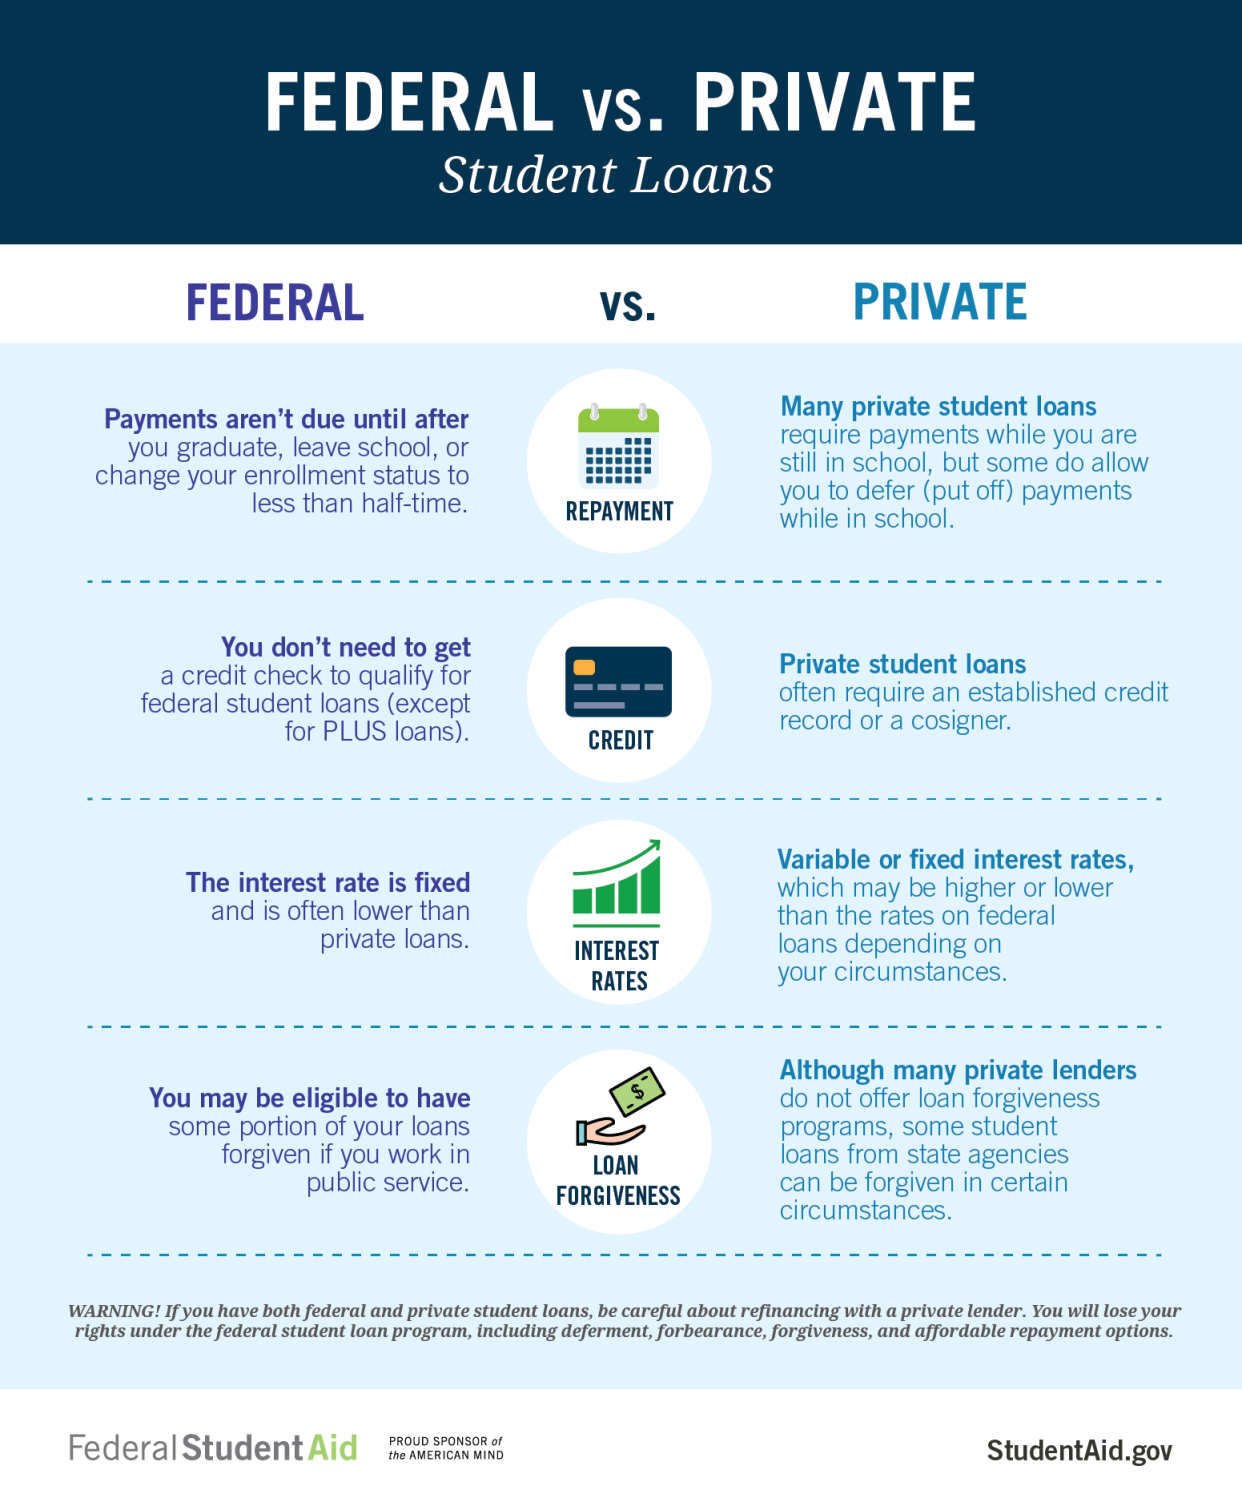 The difference between federal and private student loans